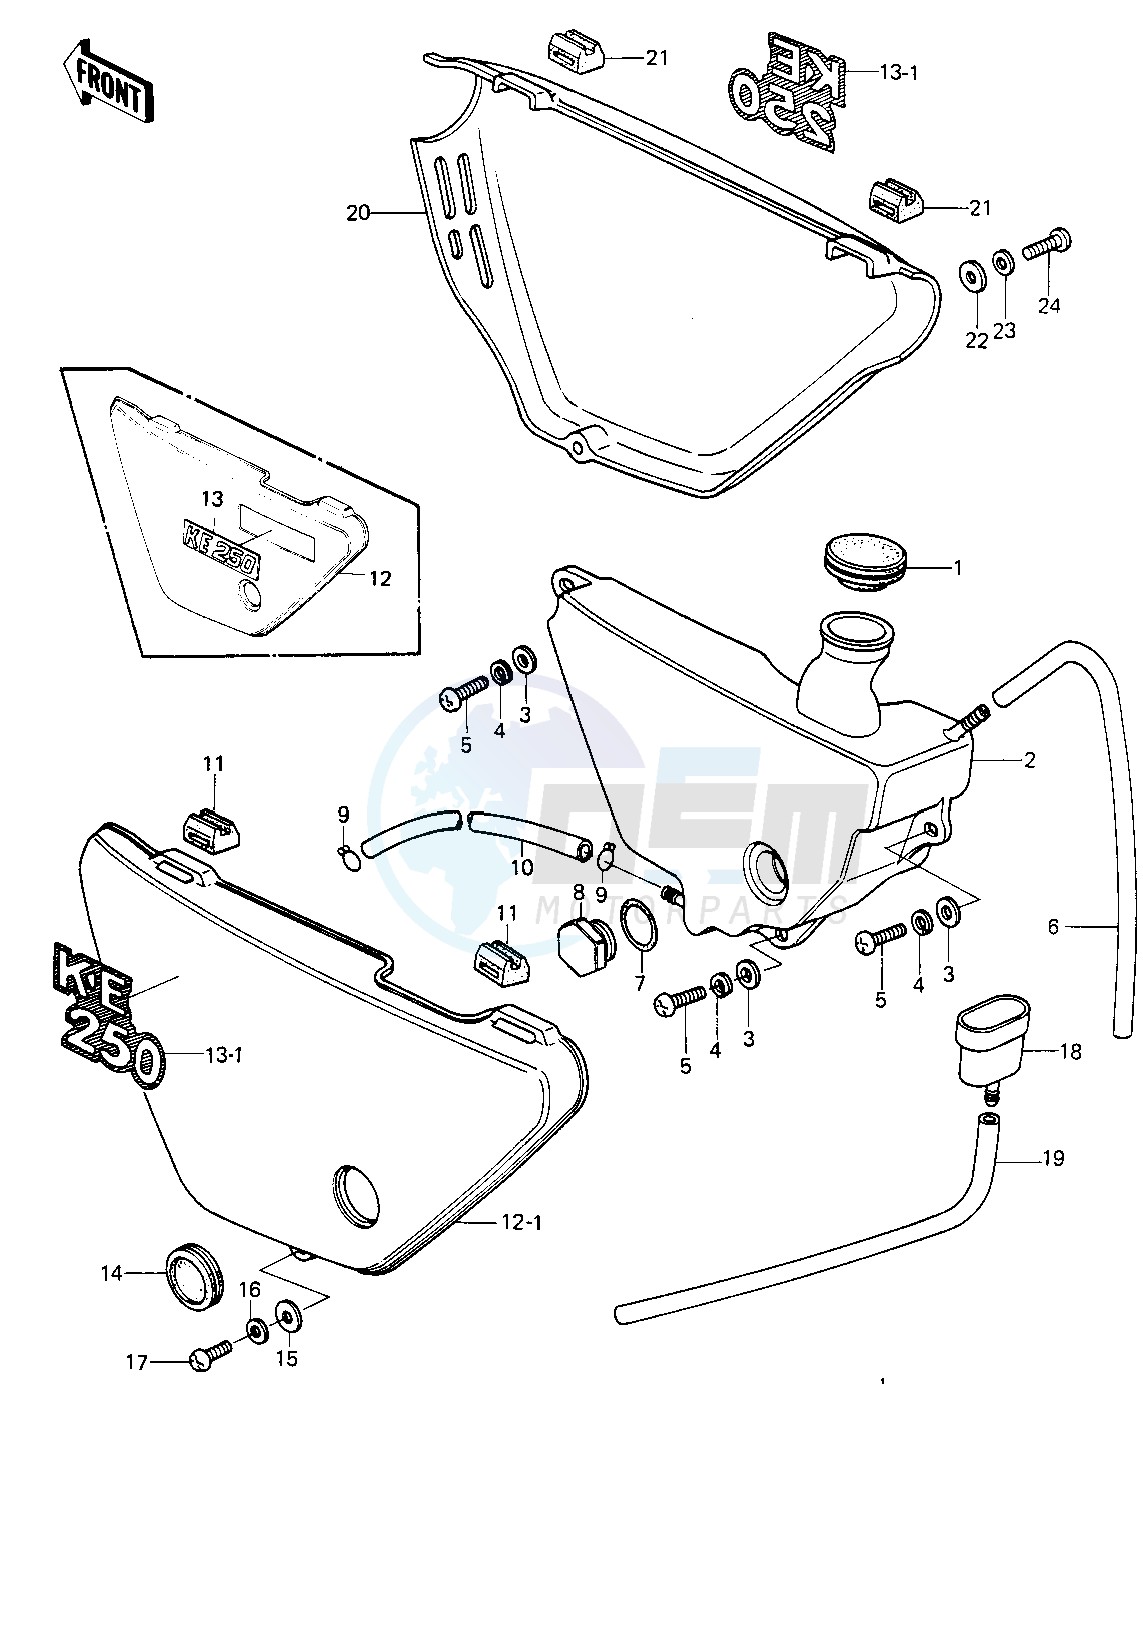 SIDE COVERS_OIL TANK blueprint